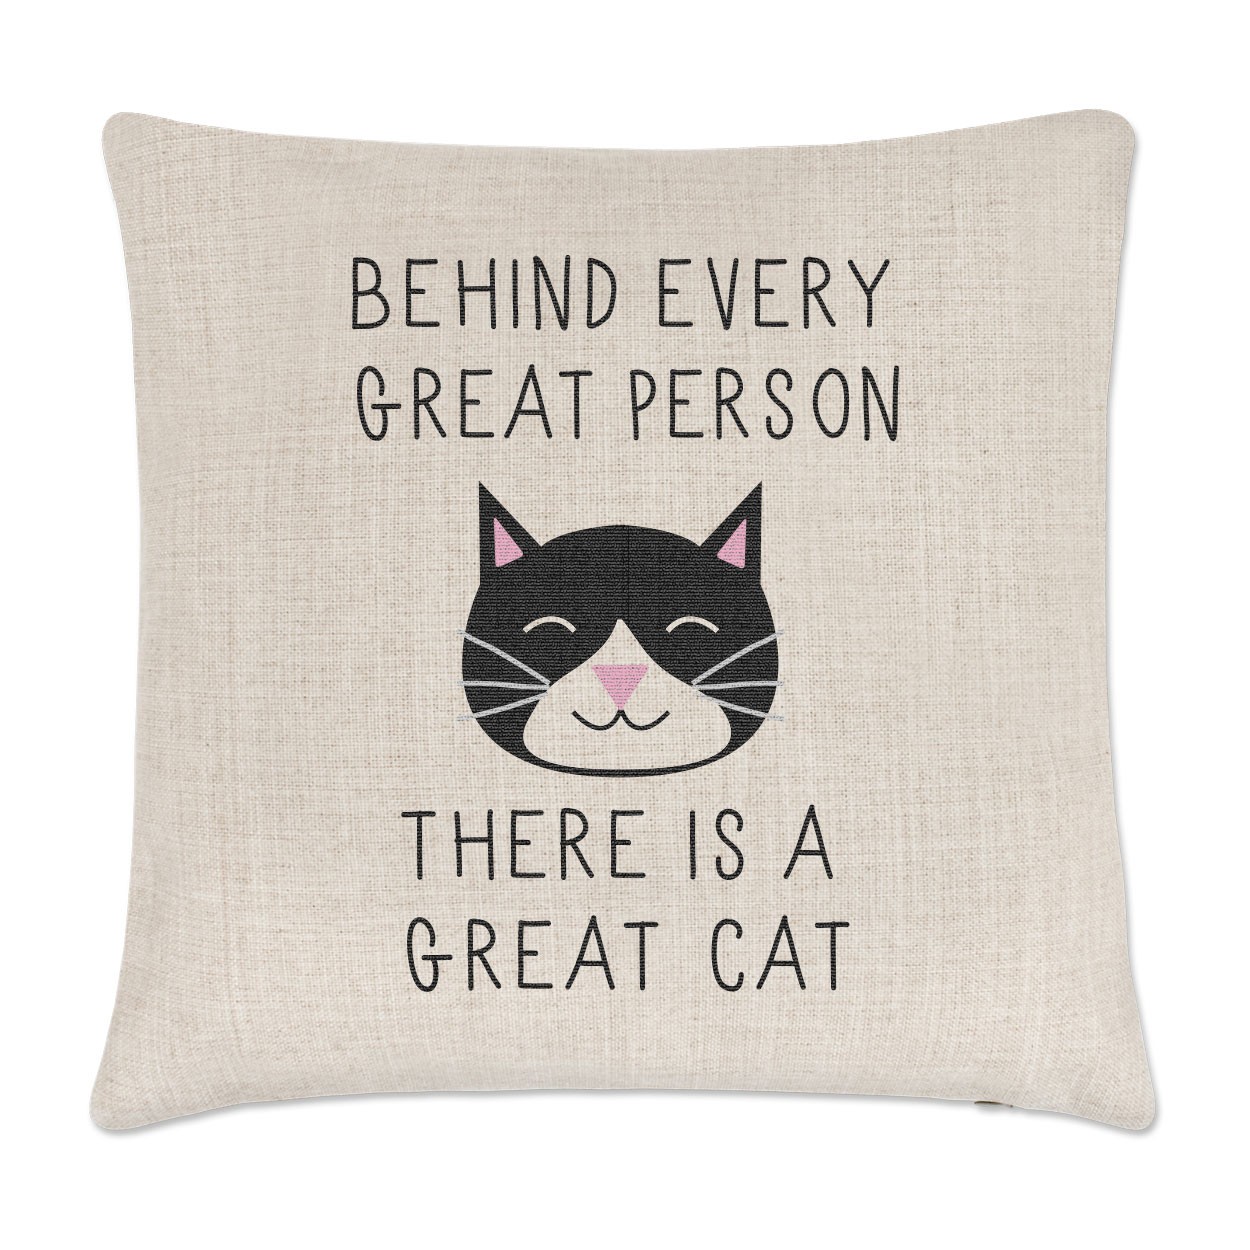 Behind Every Great Person Is A Great Cat Linen Cushion Cover